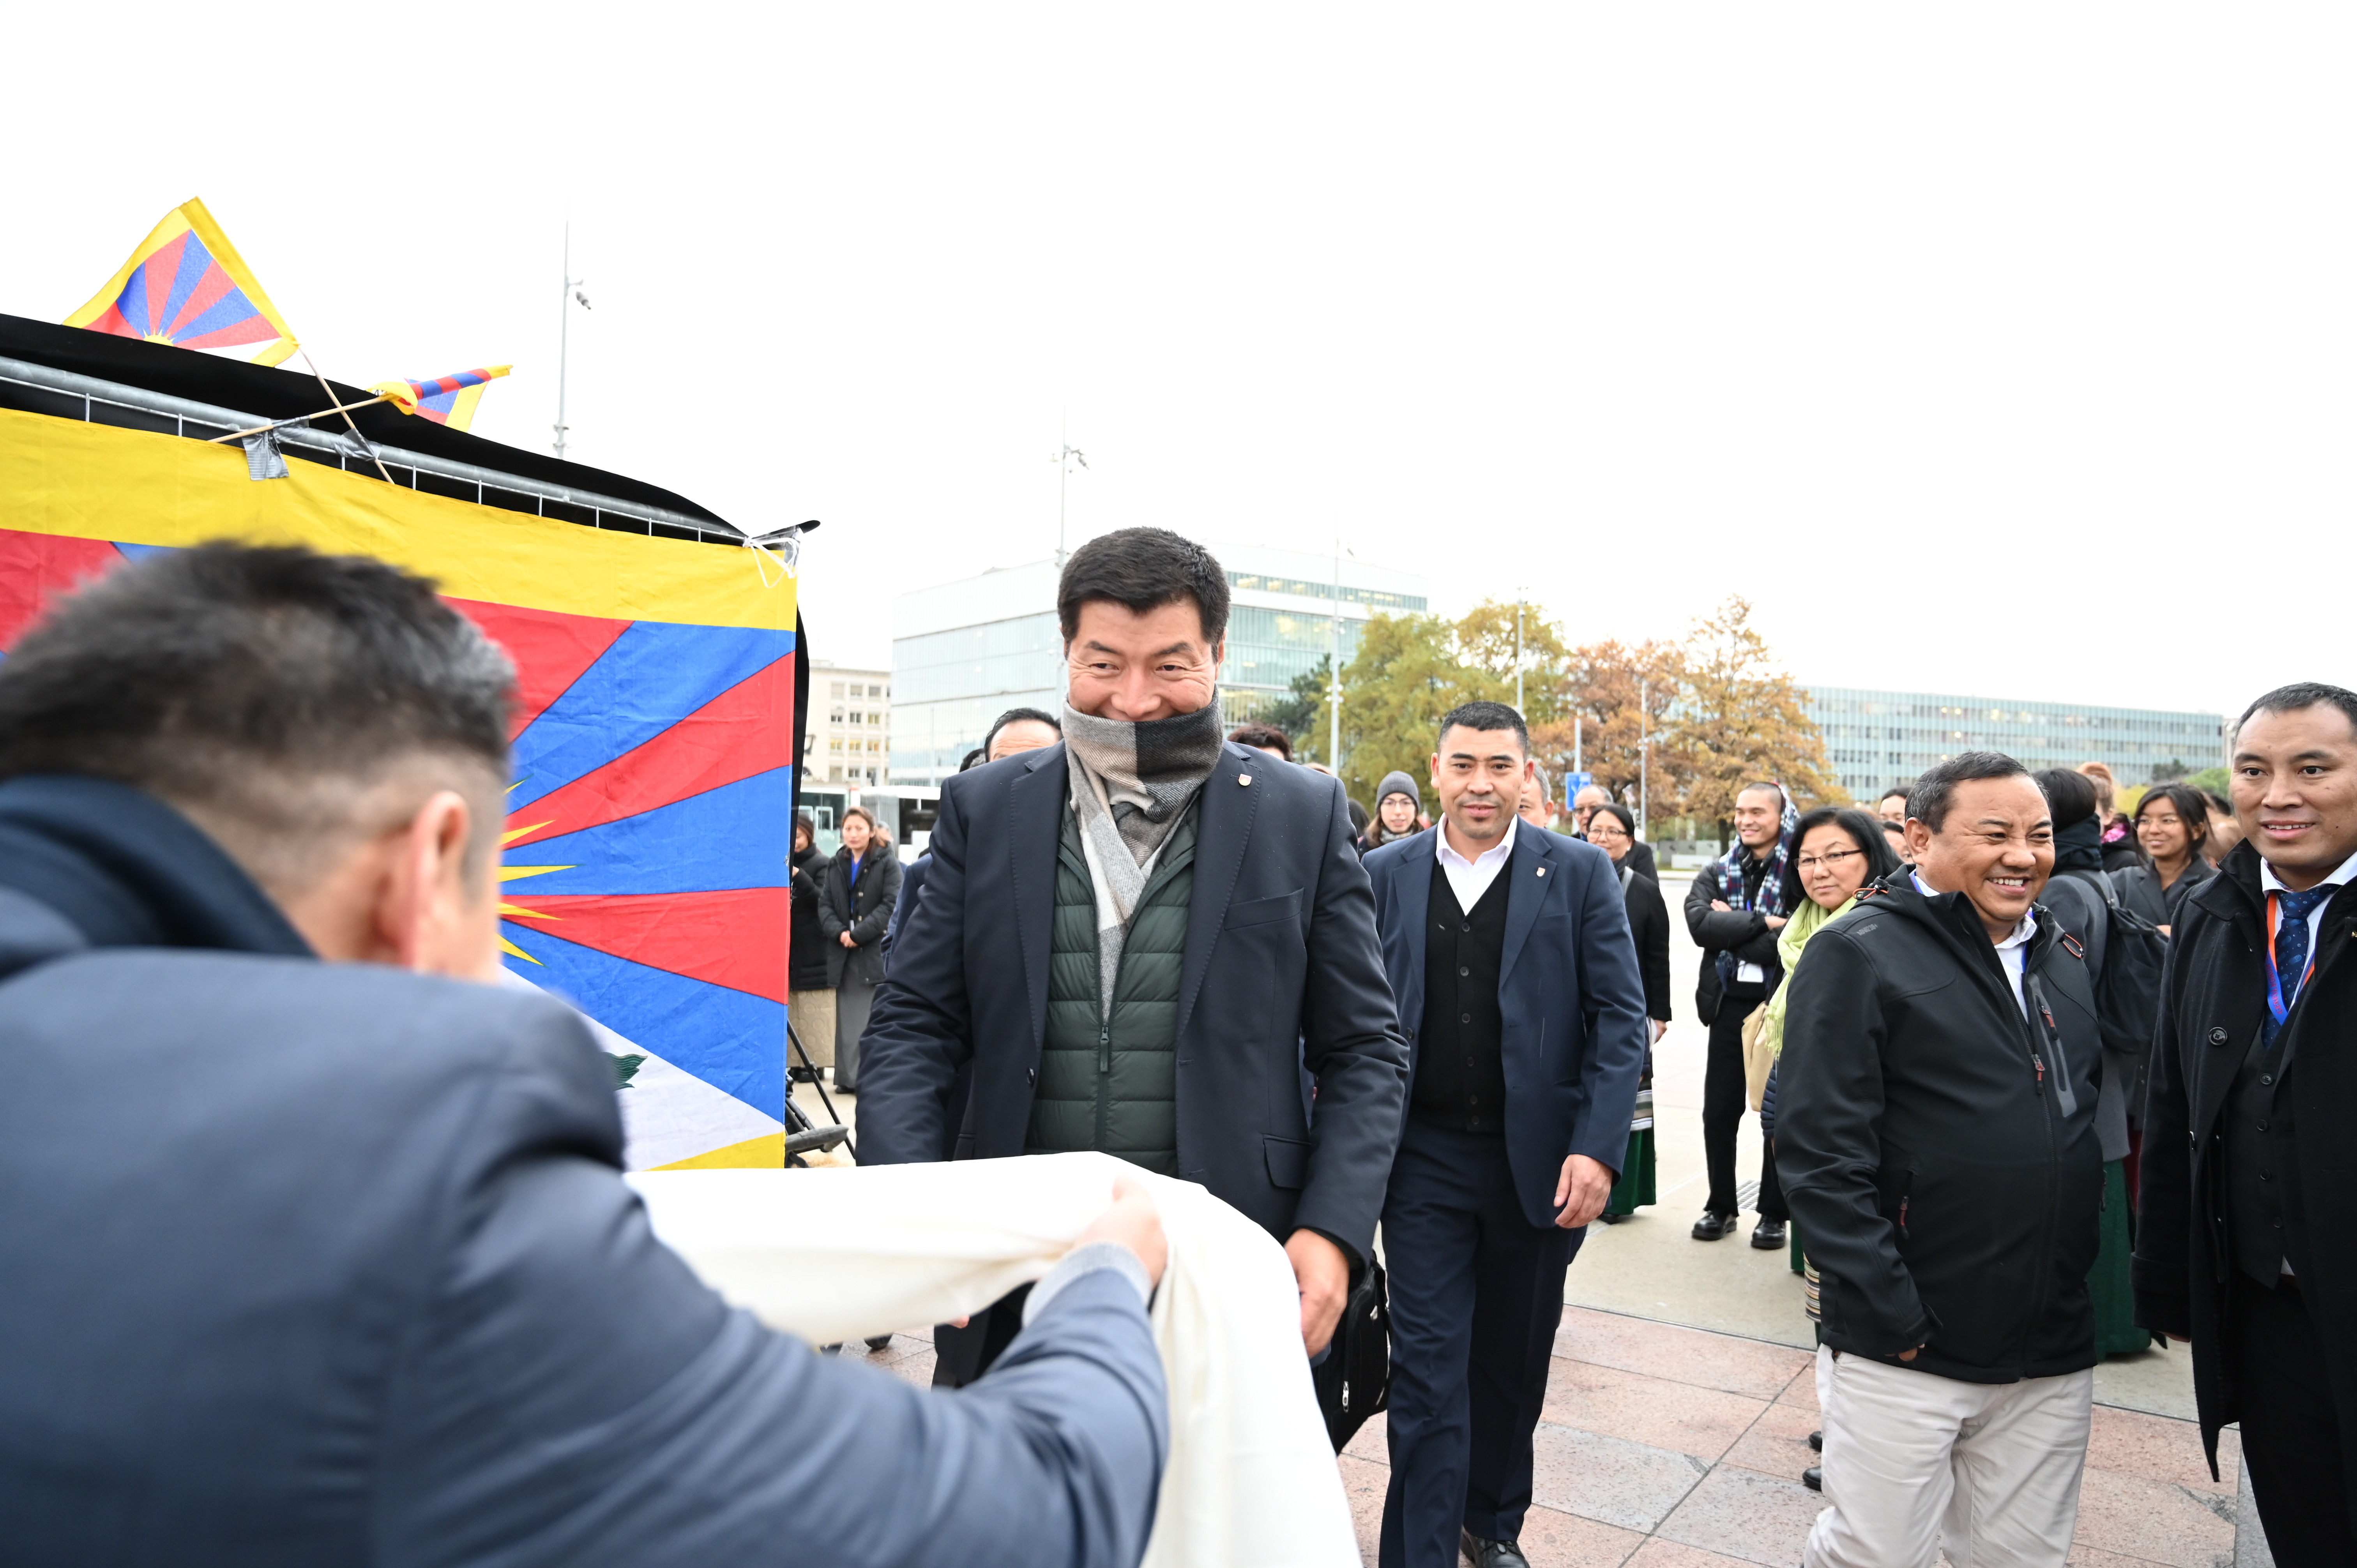 Tibet Museum staff, Mr Tenzin Topdhen, welcomes CTA President Dr Lobsang Sangay as he arrives at the exhibition site. Photo|Tenzin Nyishon|Switzerland